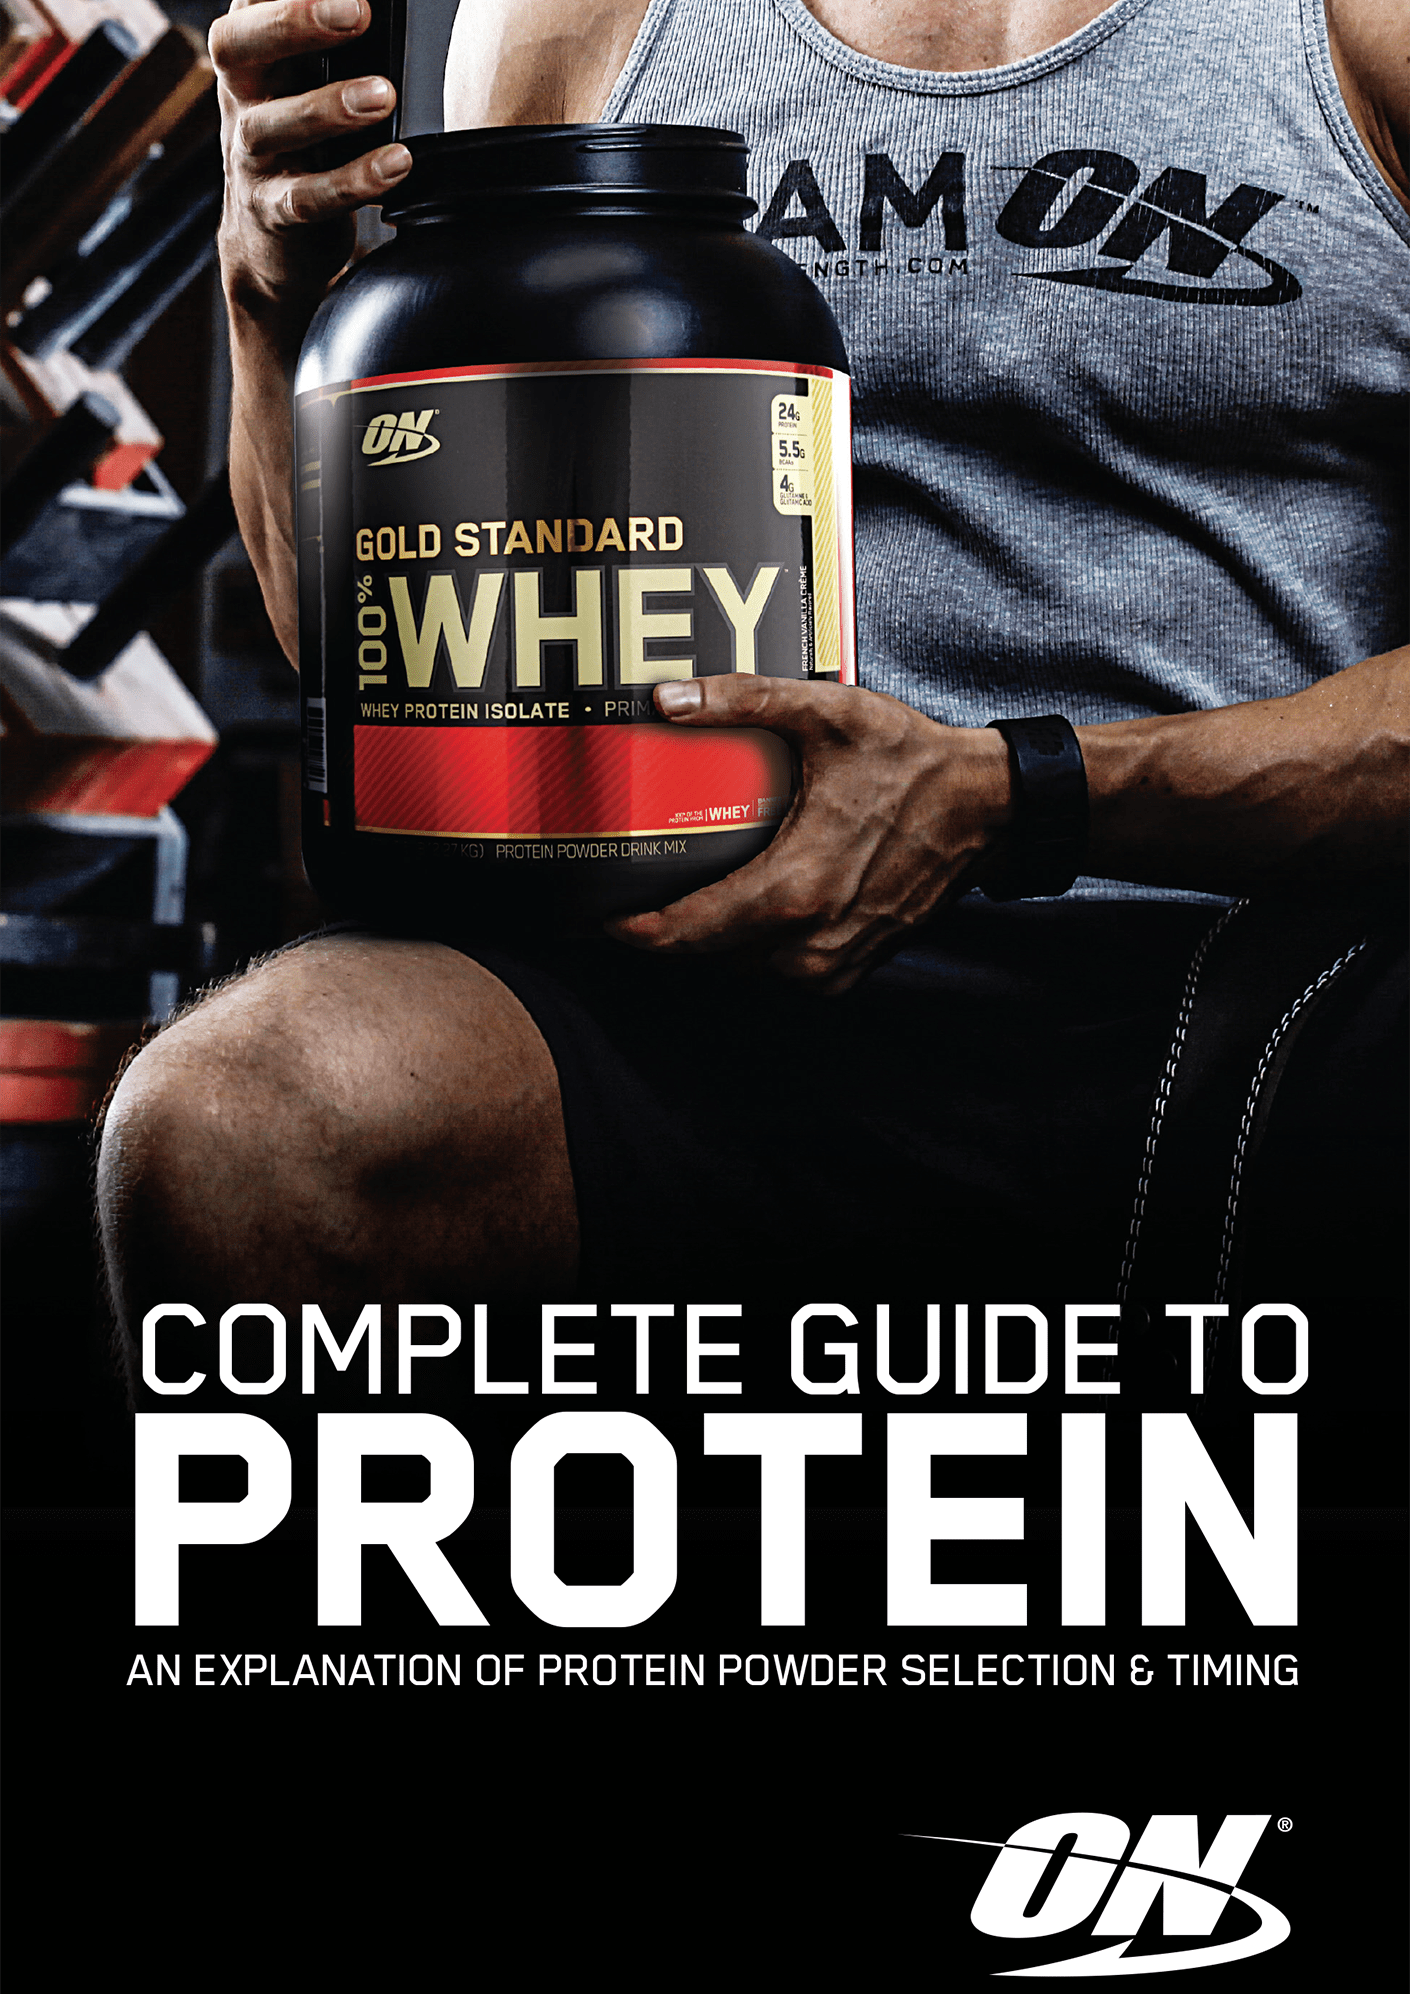 Complete Guide to Protein